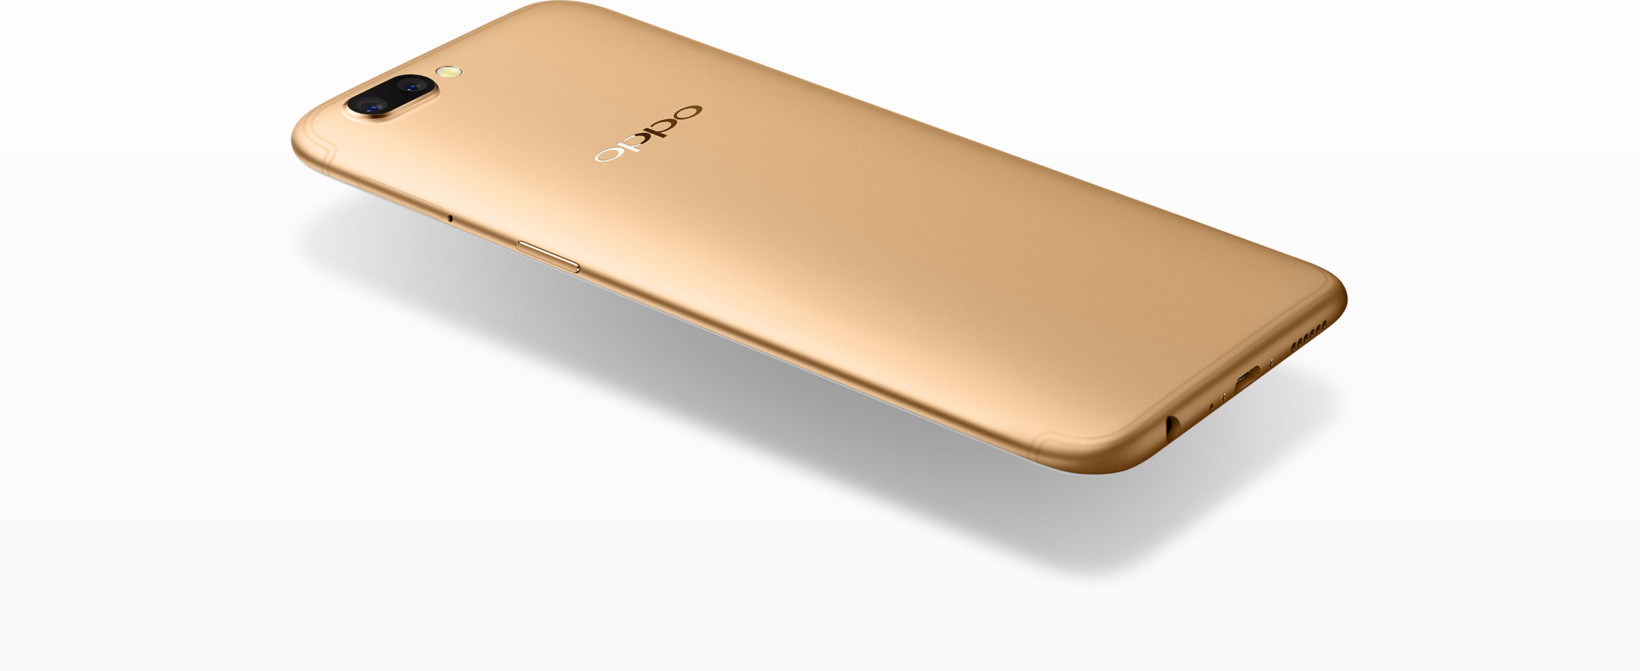 Oppo's R11 is only 6.78mm thick (but incidentally comes with a 3.5mm jack)